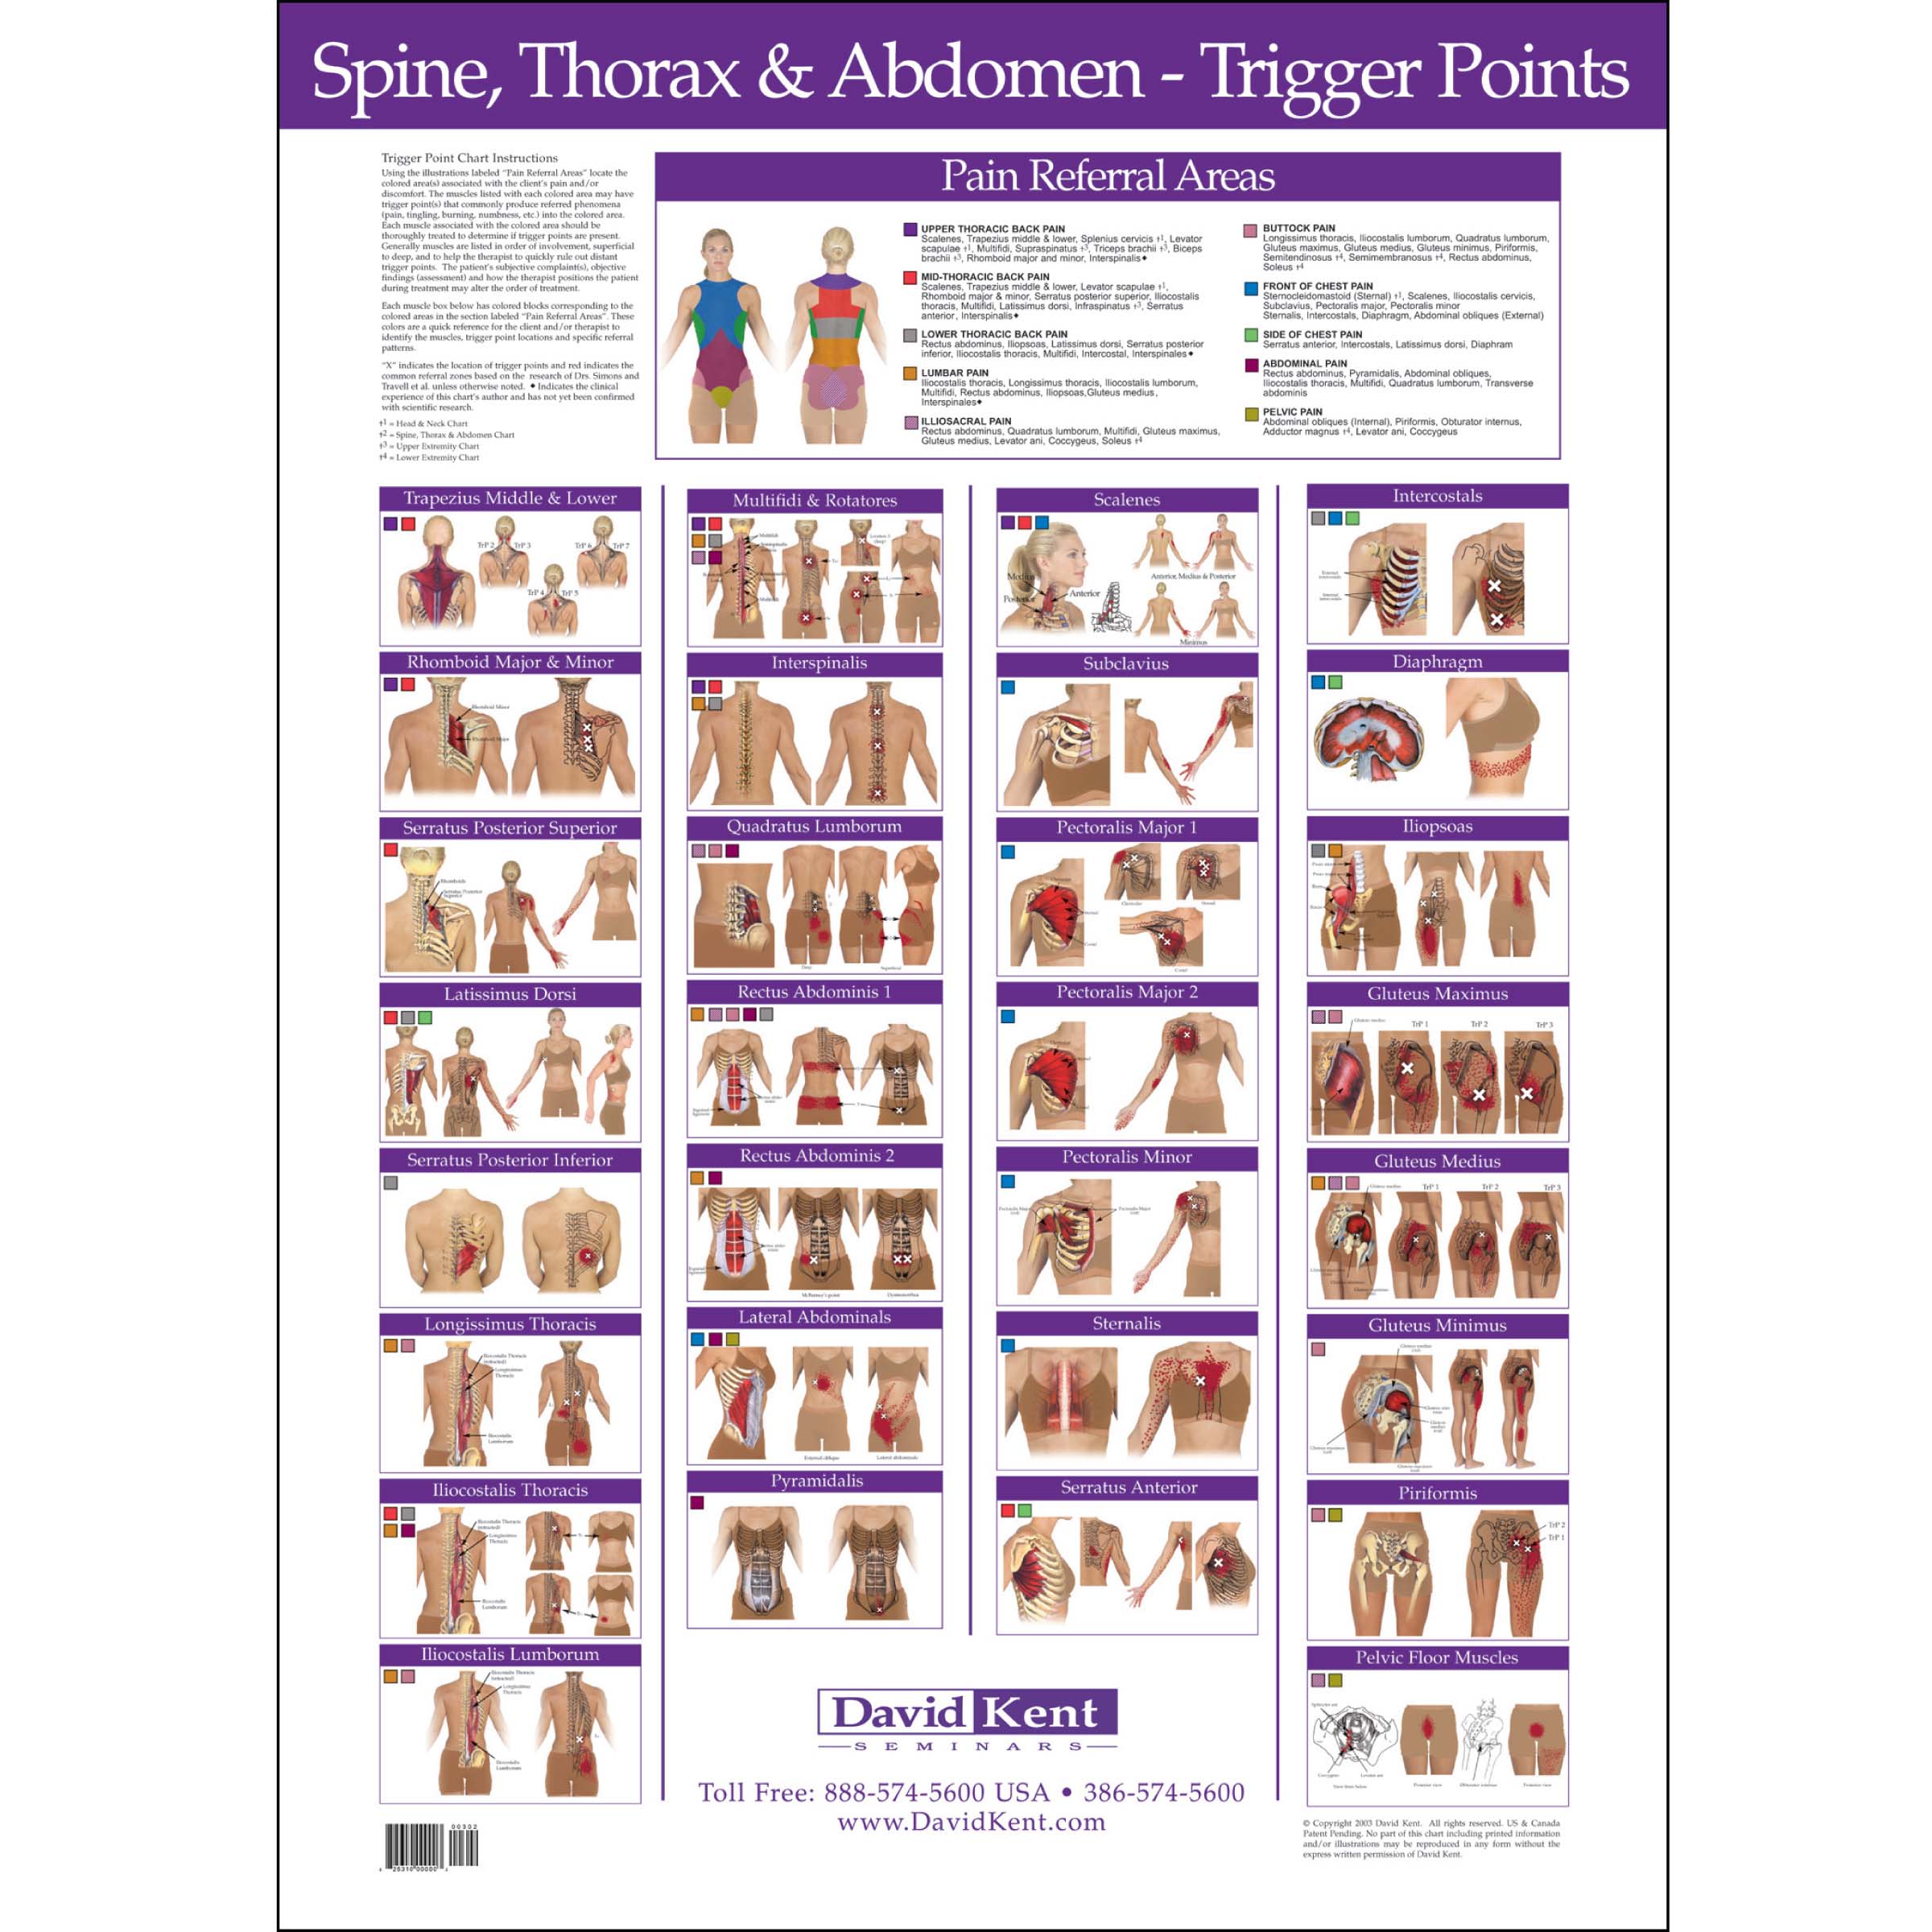 Travell Trigger Point Chart